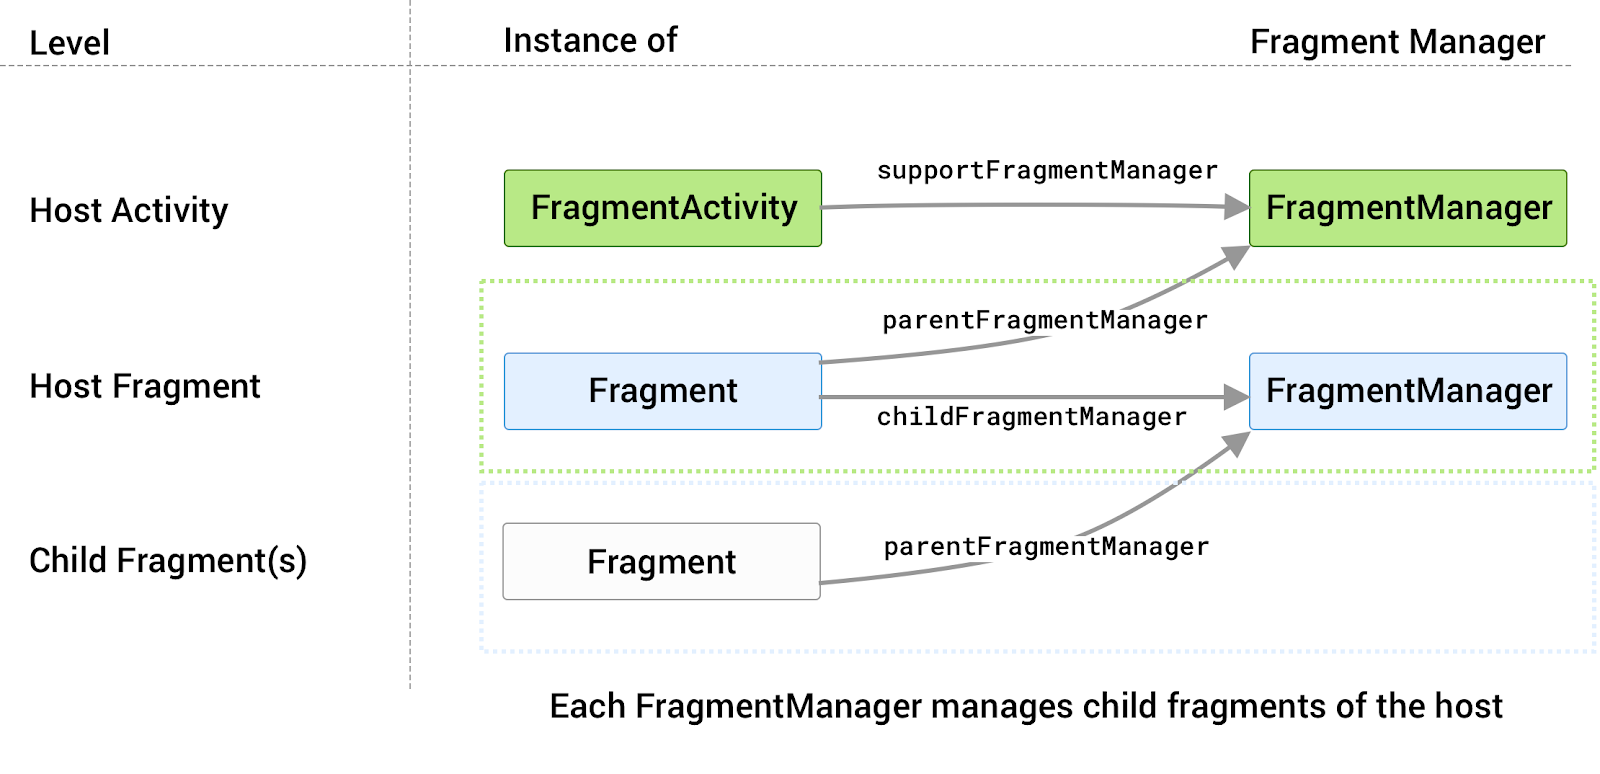 each host has its own FragmentManager associated with it
            that manages its child fragments